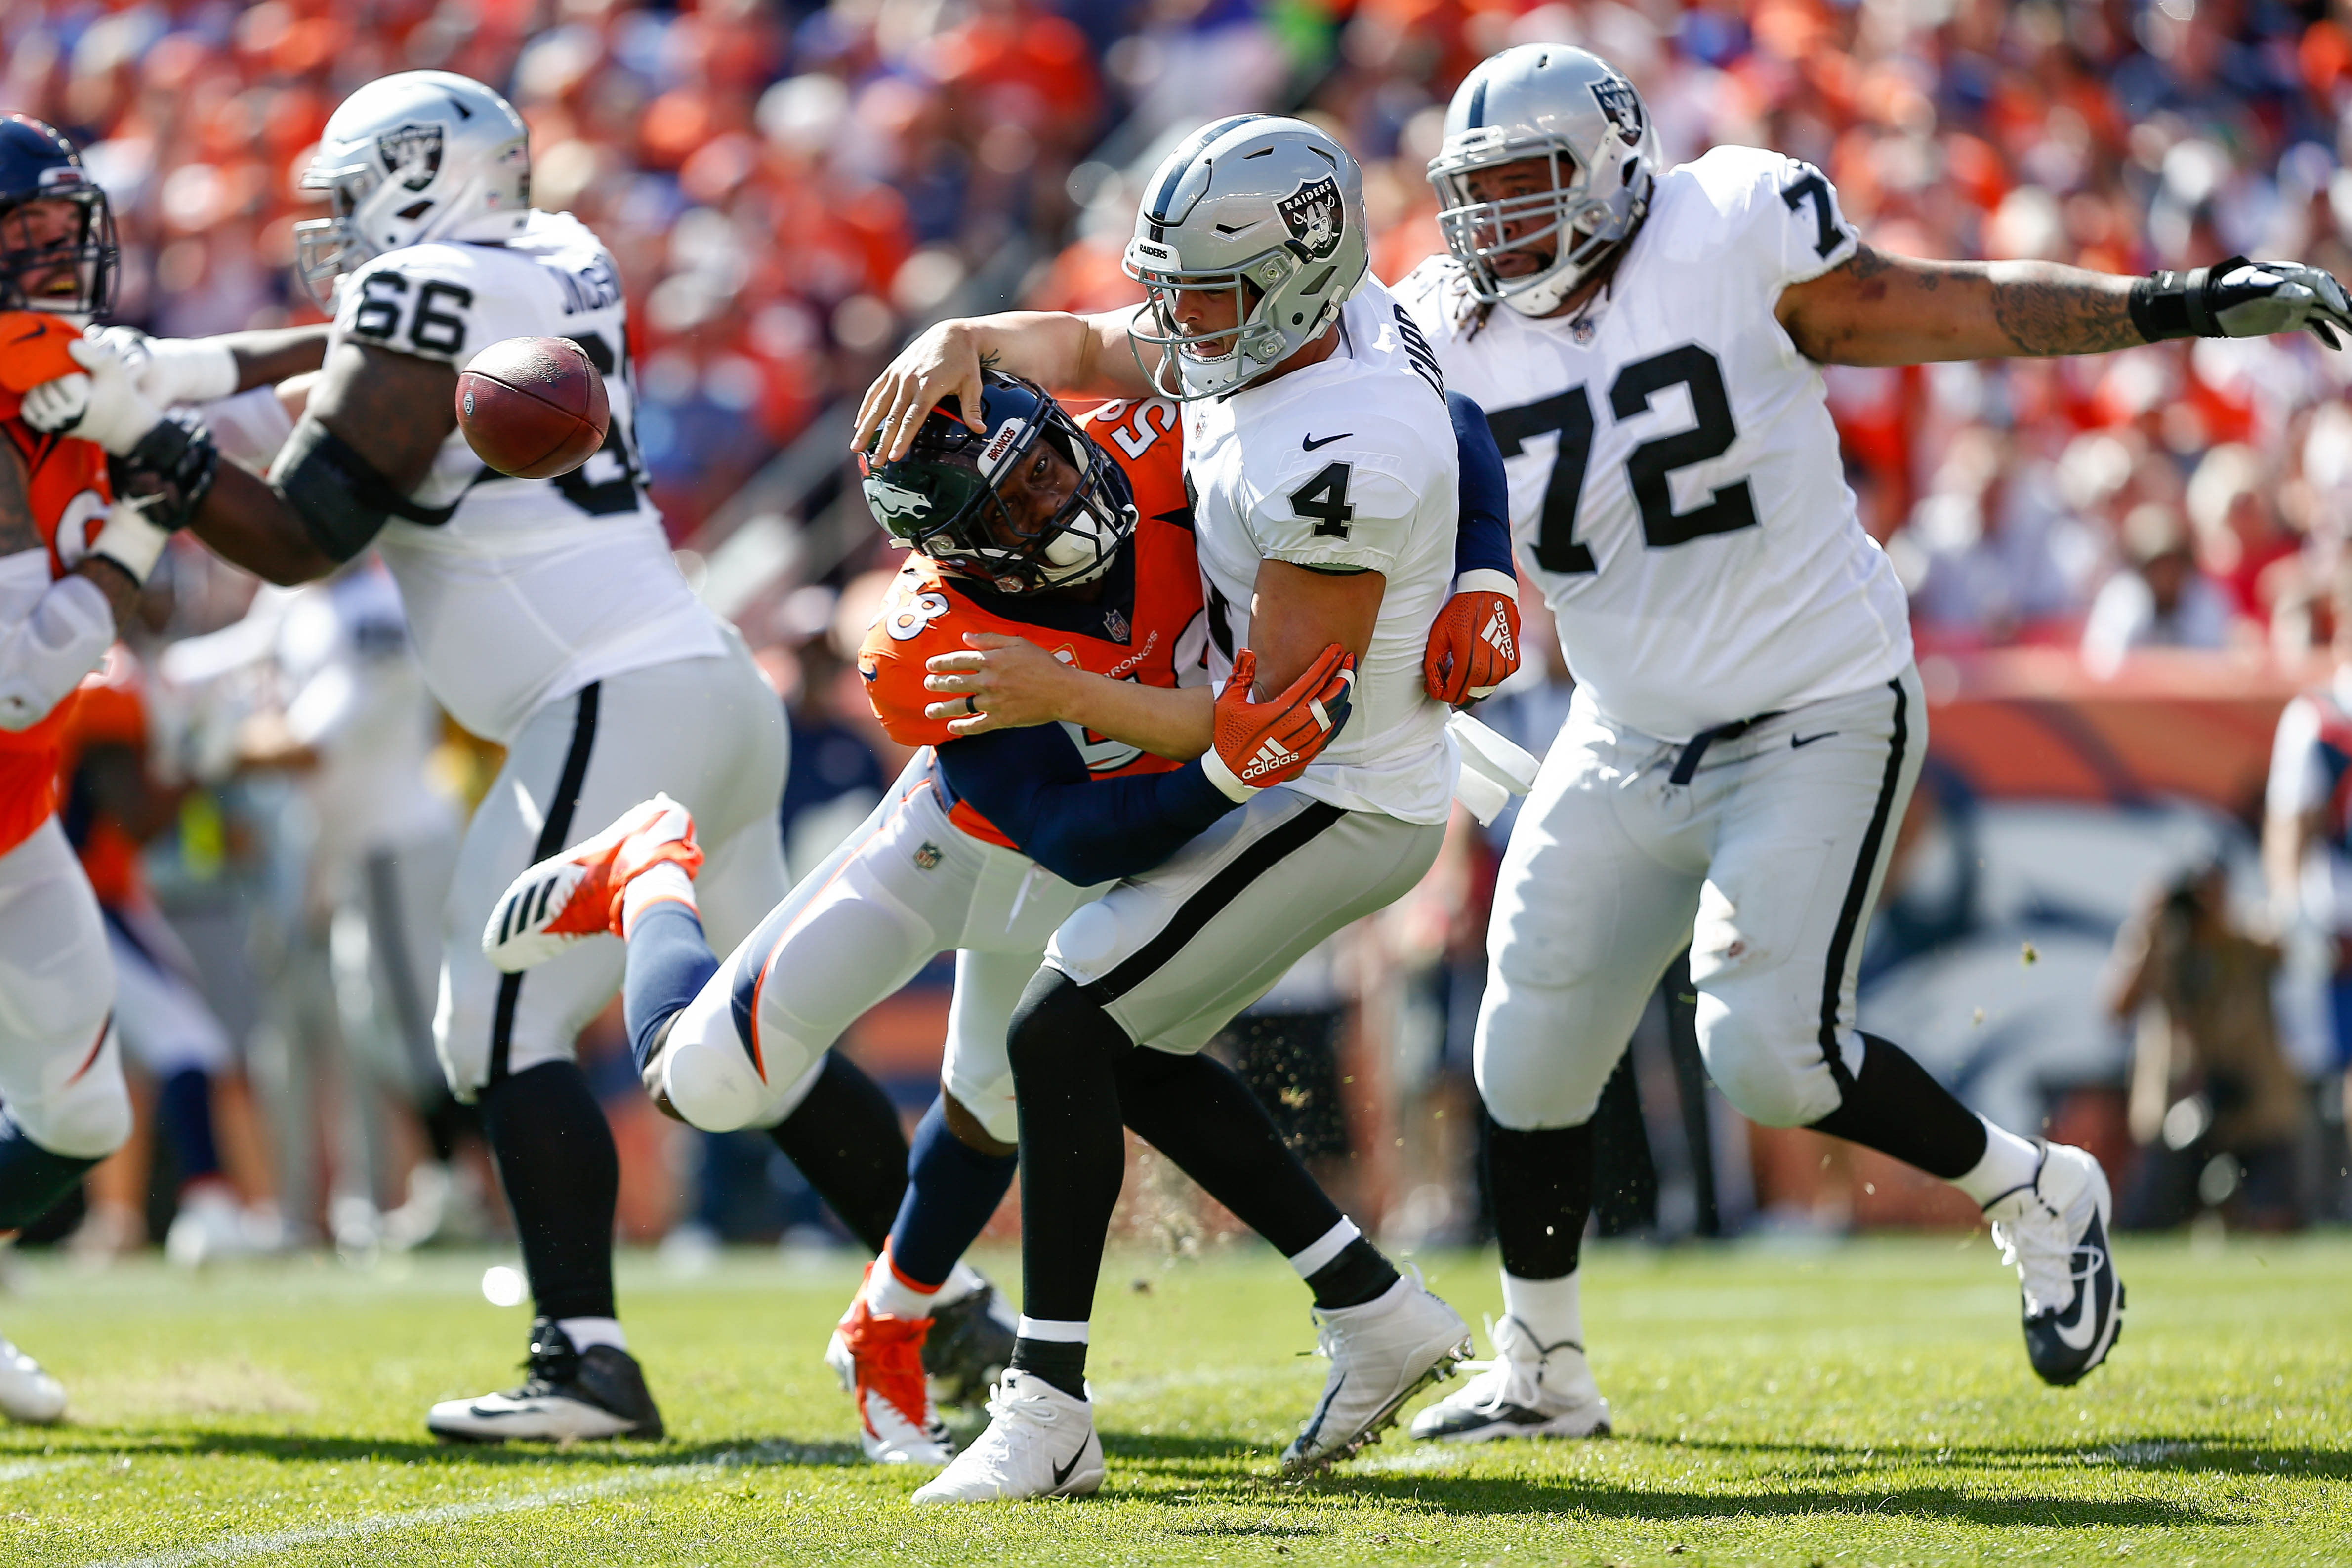 Denver Broncos outside linebacker Von Miller (58) strip sacks Oakland Raiders quarterback Derek Carr (4) as Oakland Raiders offensive tackle Donald Penn (72) defends, but the play would be called back on a defensive penalty in the first quarter at Broncos Stadium at Mile High